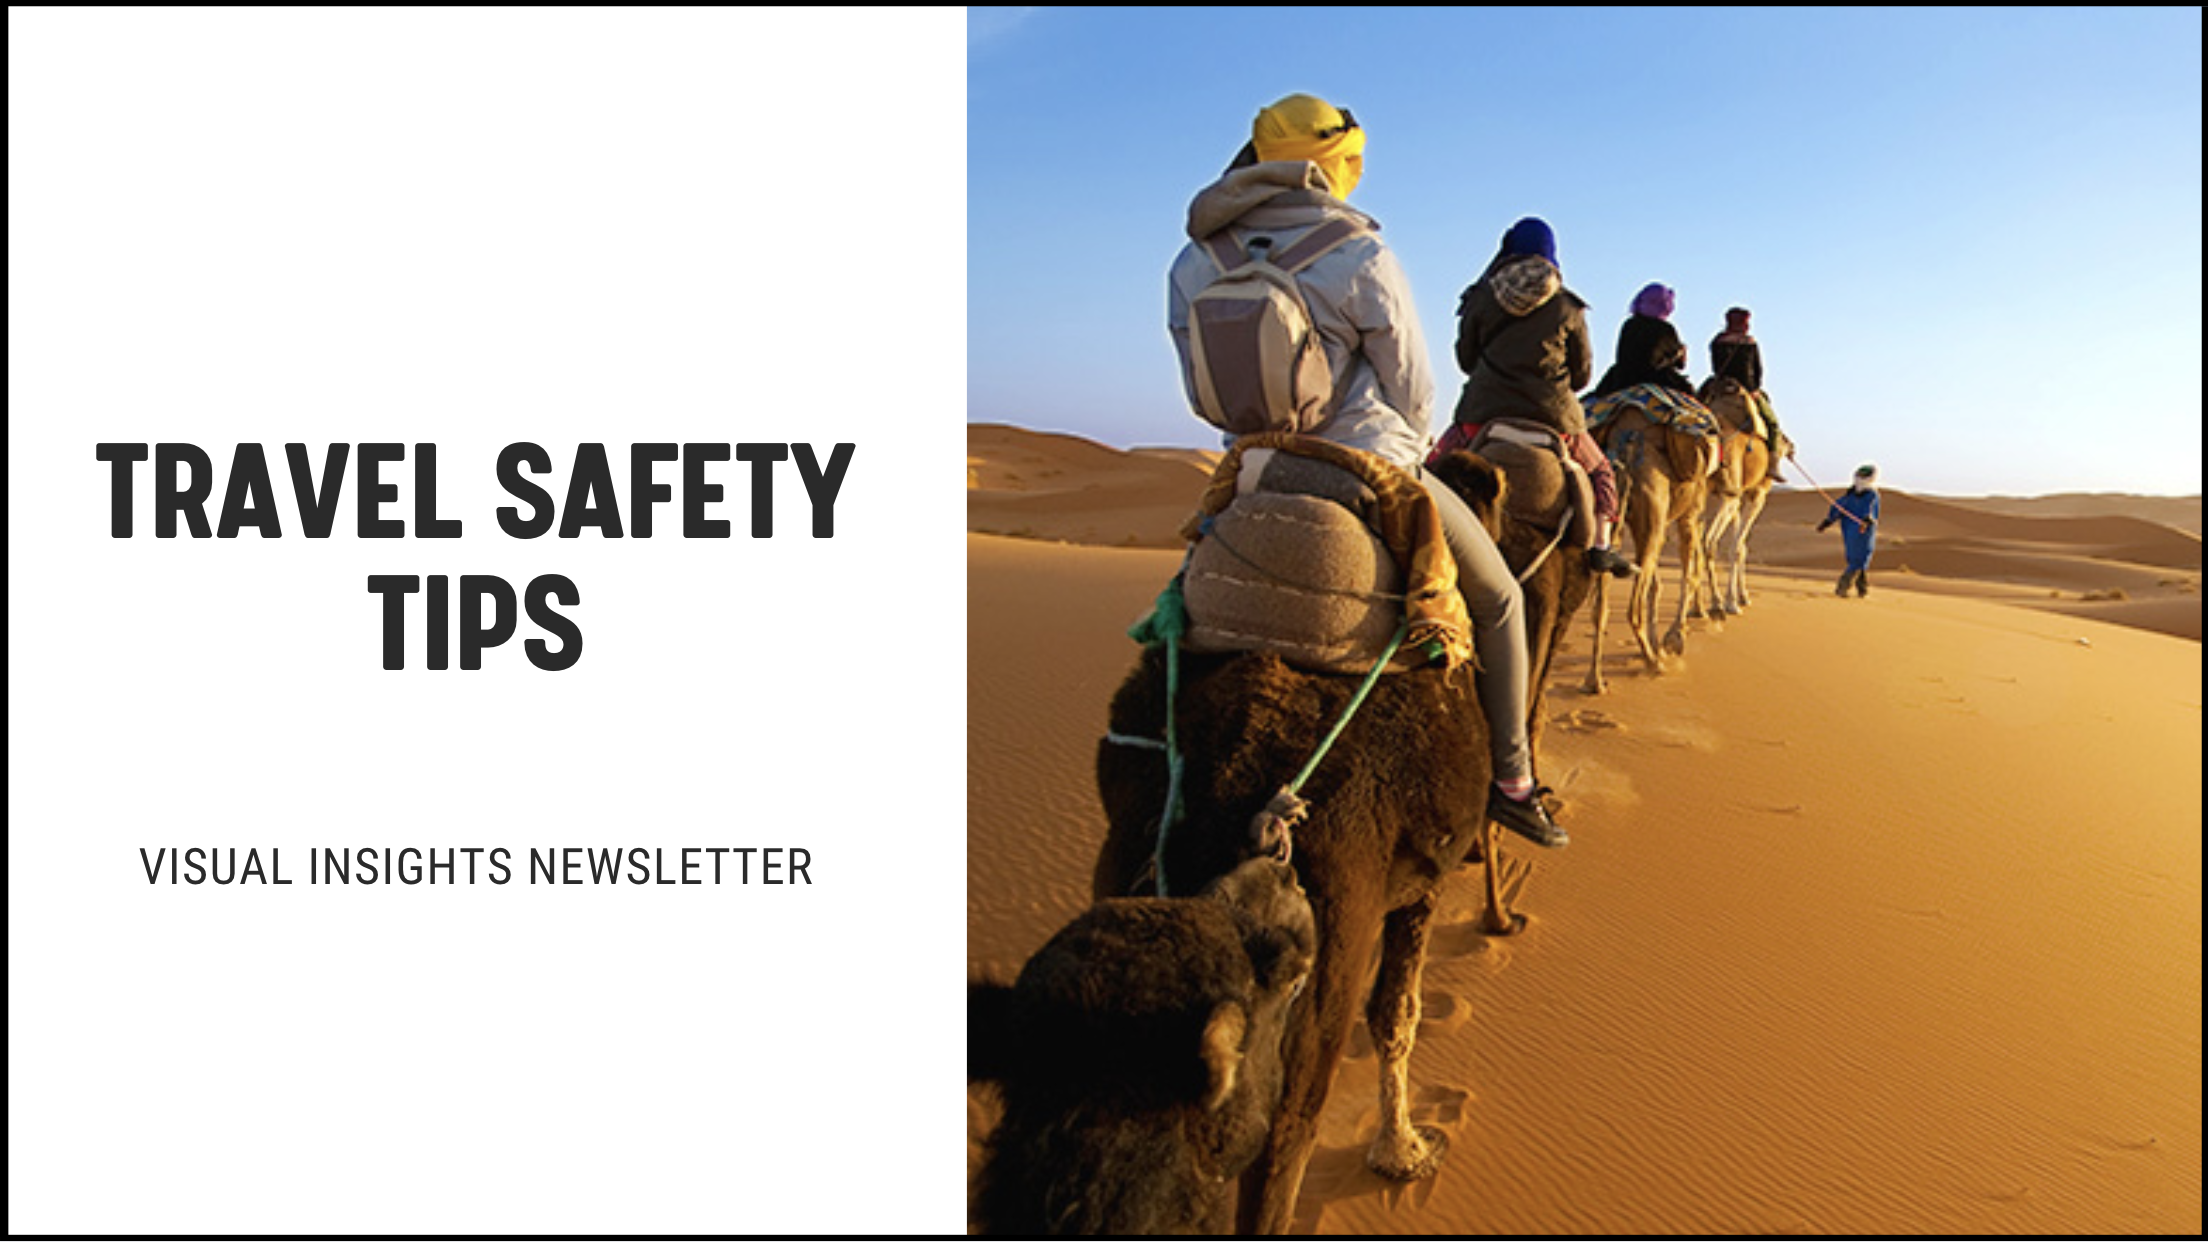 [NEW] Travel Safety Tips - Visual Insights Newsletter Marketing Campaigns for Financial Advisors